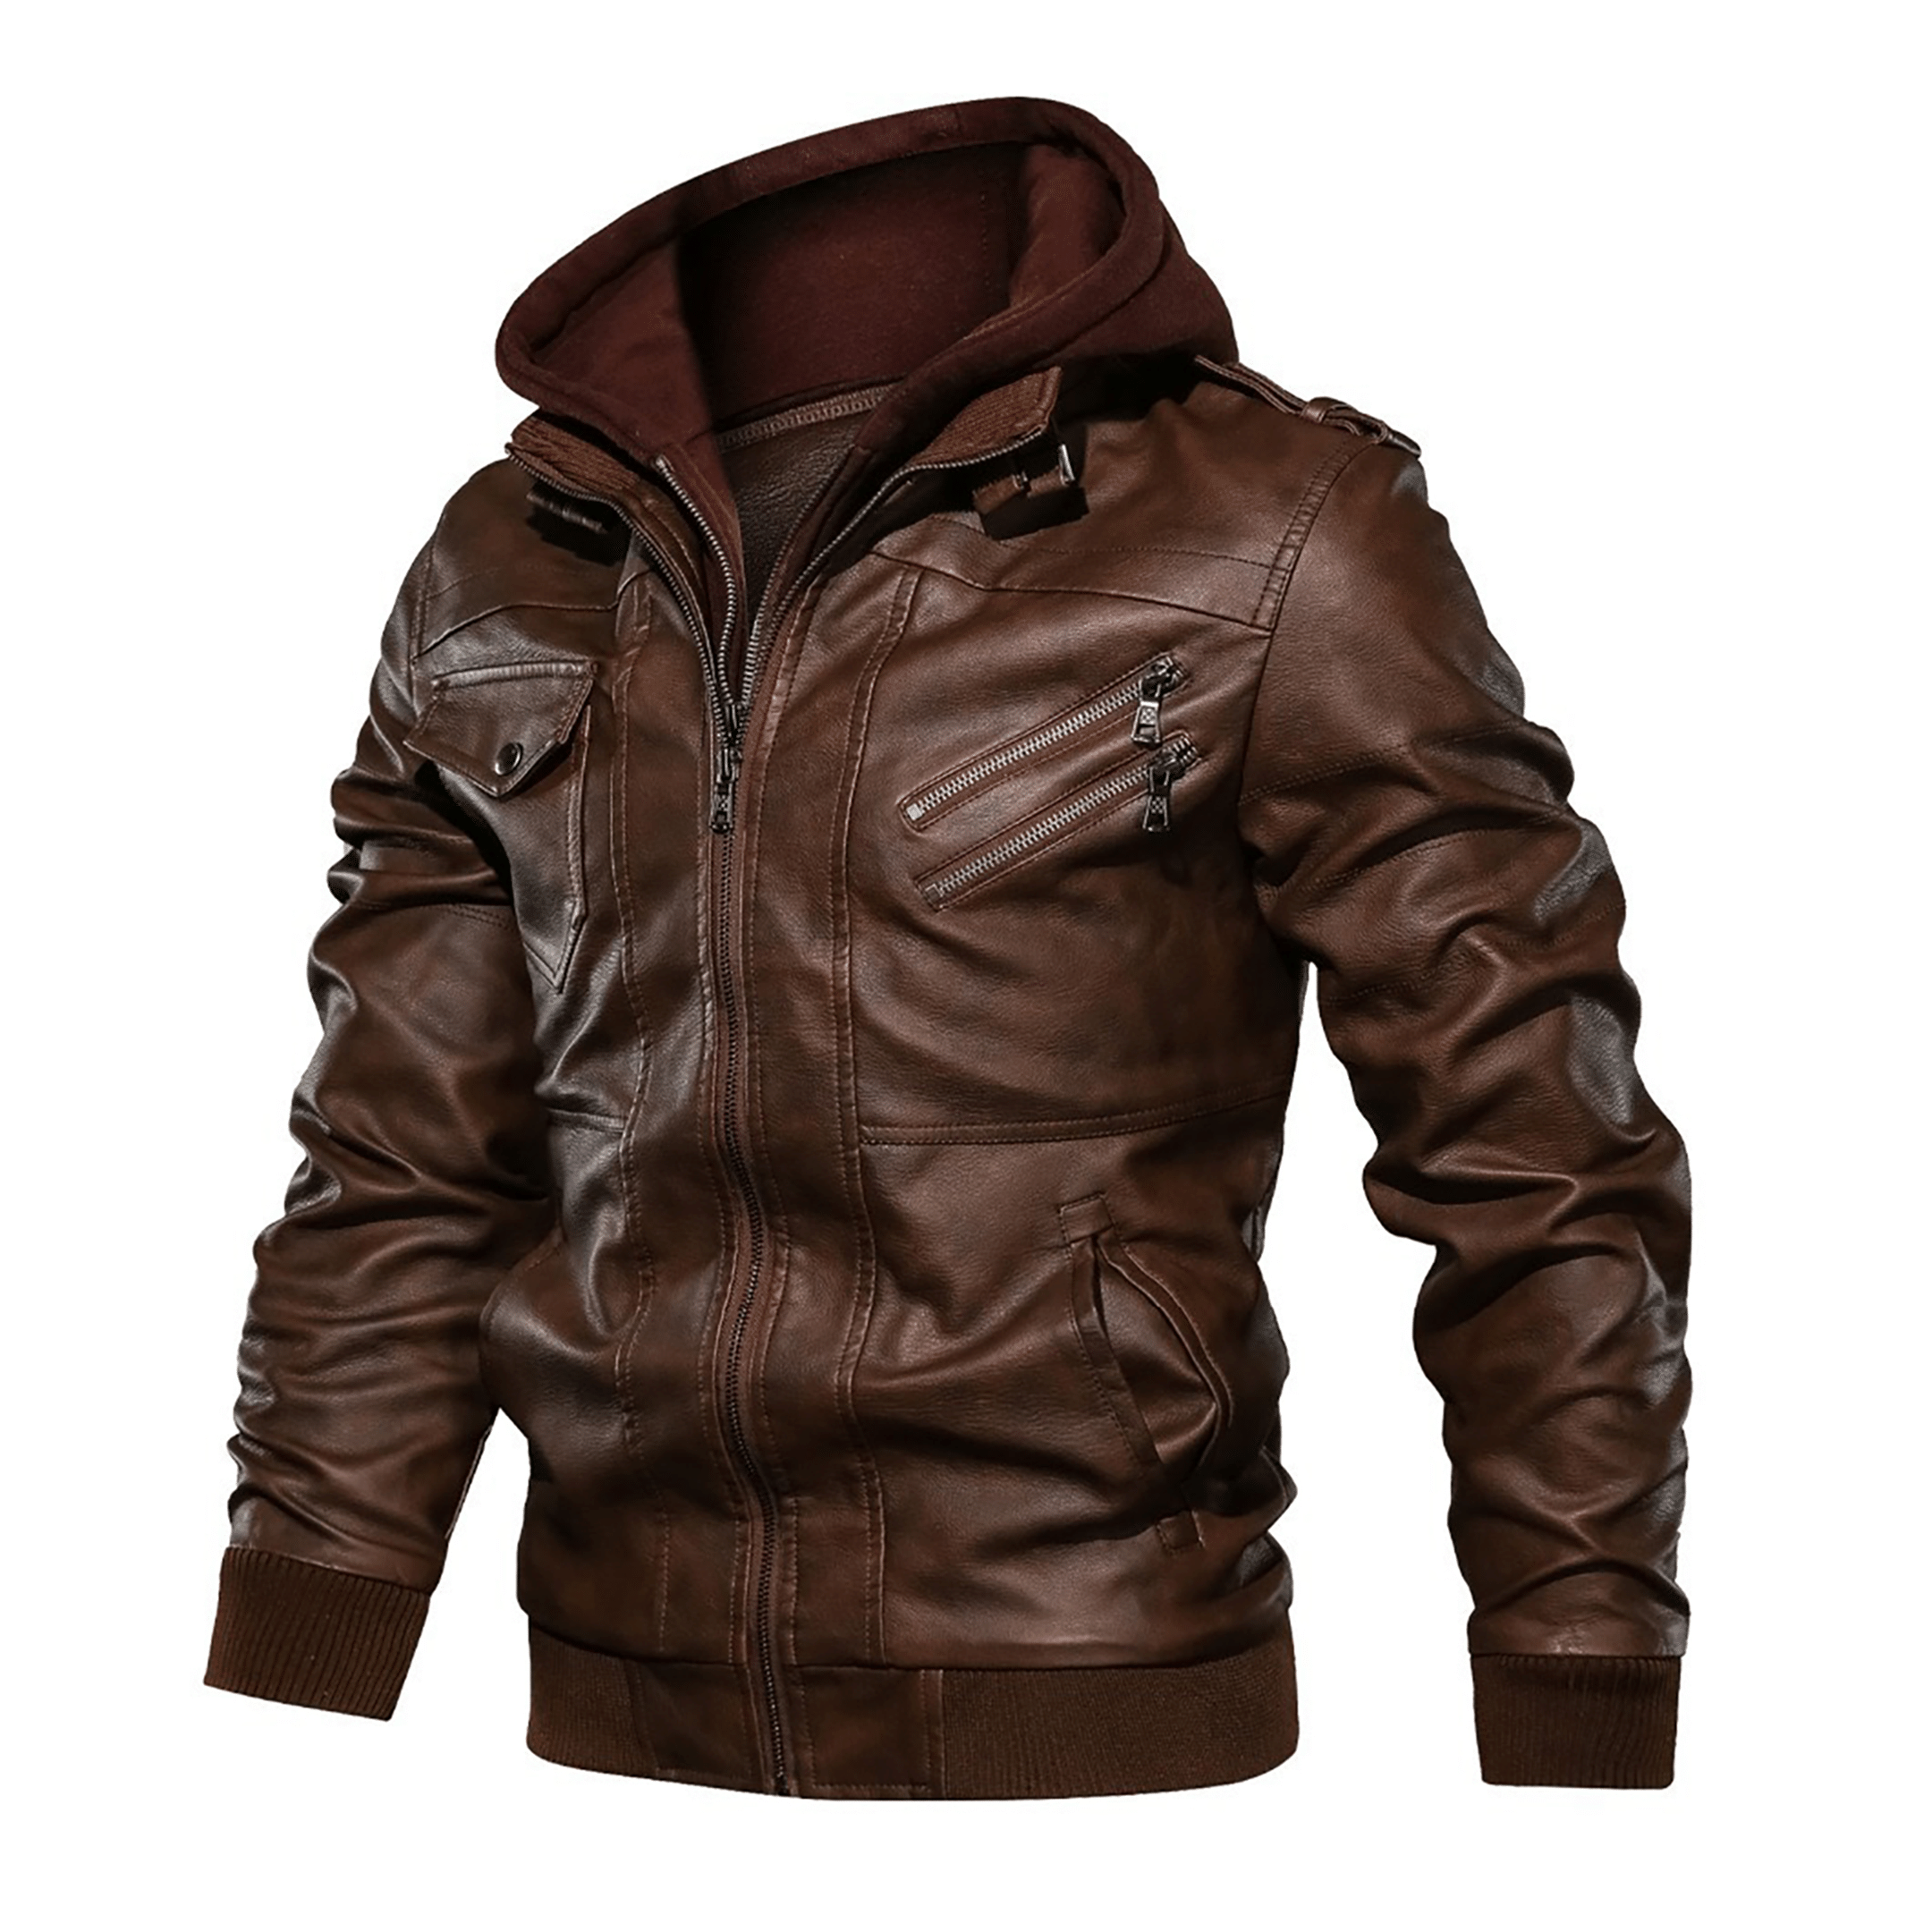 Top leather jackets and latest products 155